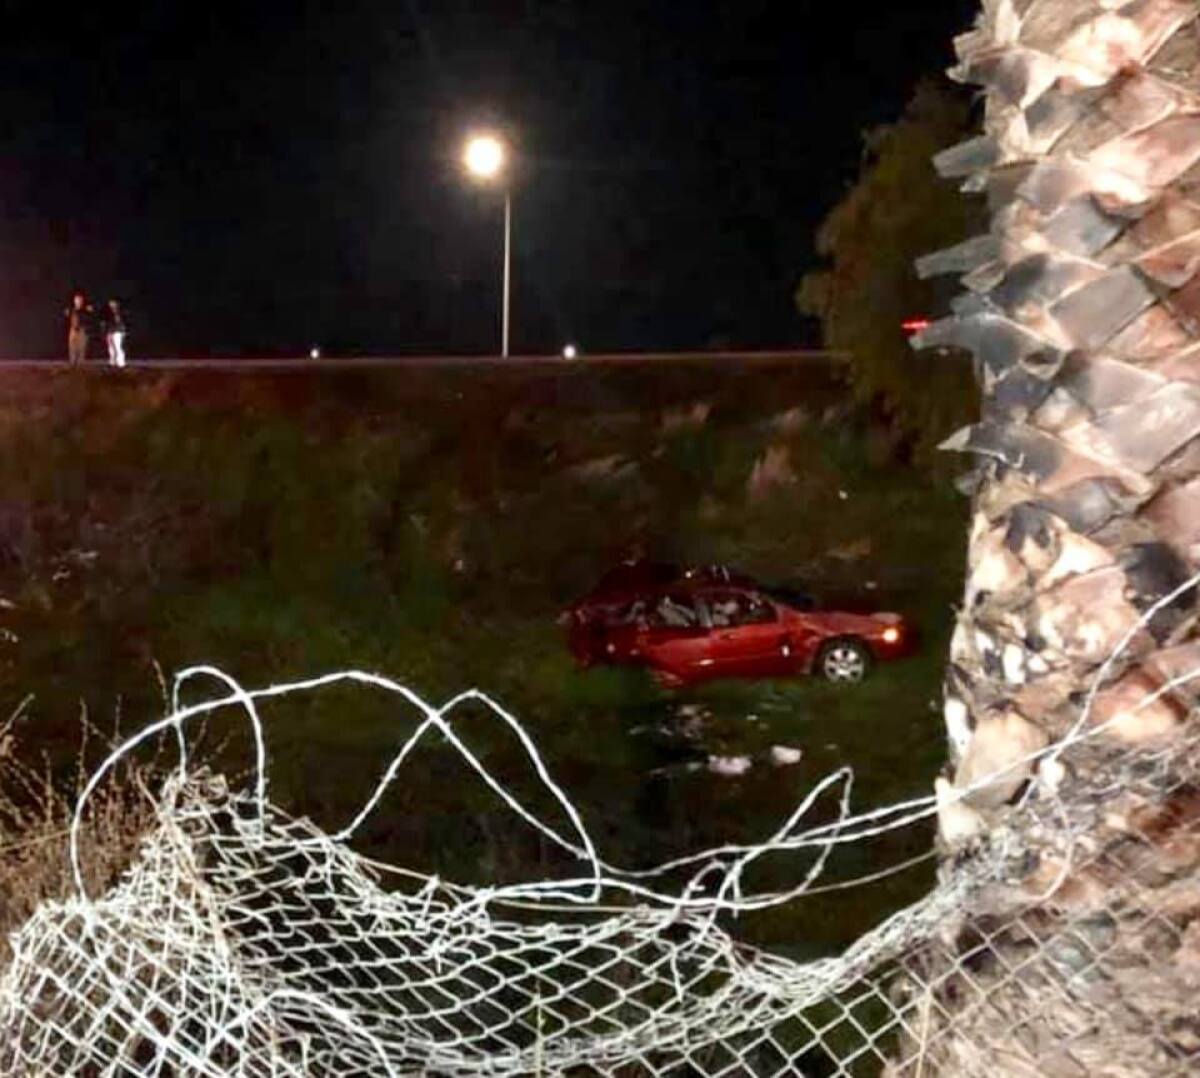 Authorities say a San Joaquin County sheriff's deputy struck a vehicle, causing the driver to lose control and slide into an embankment. An infant in the back seat died in the crash.